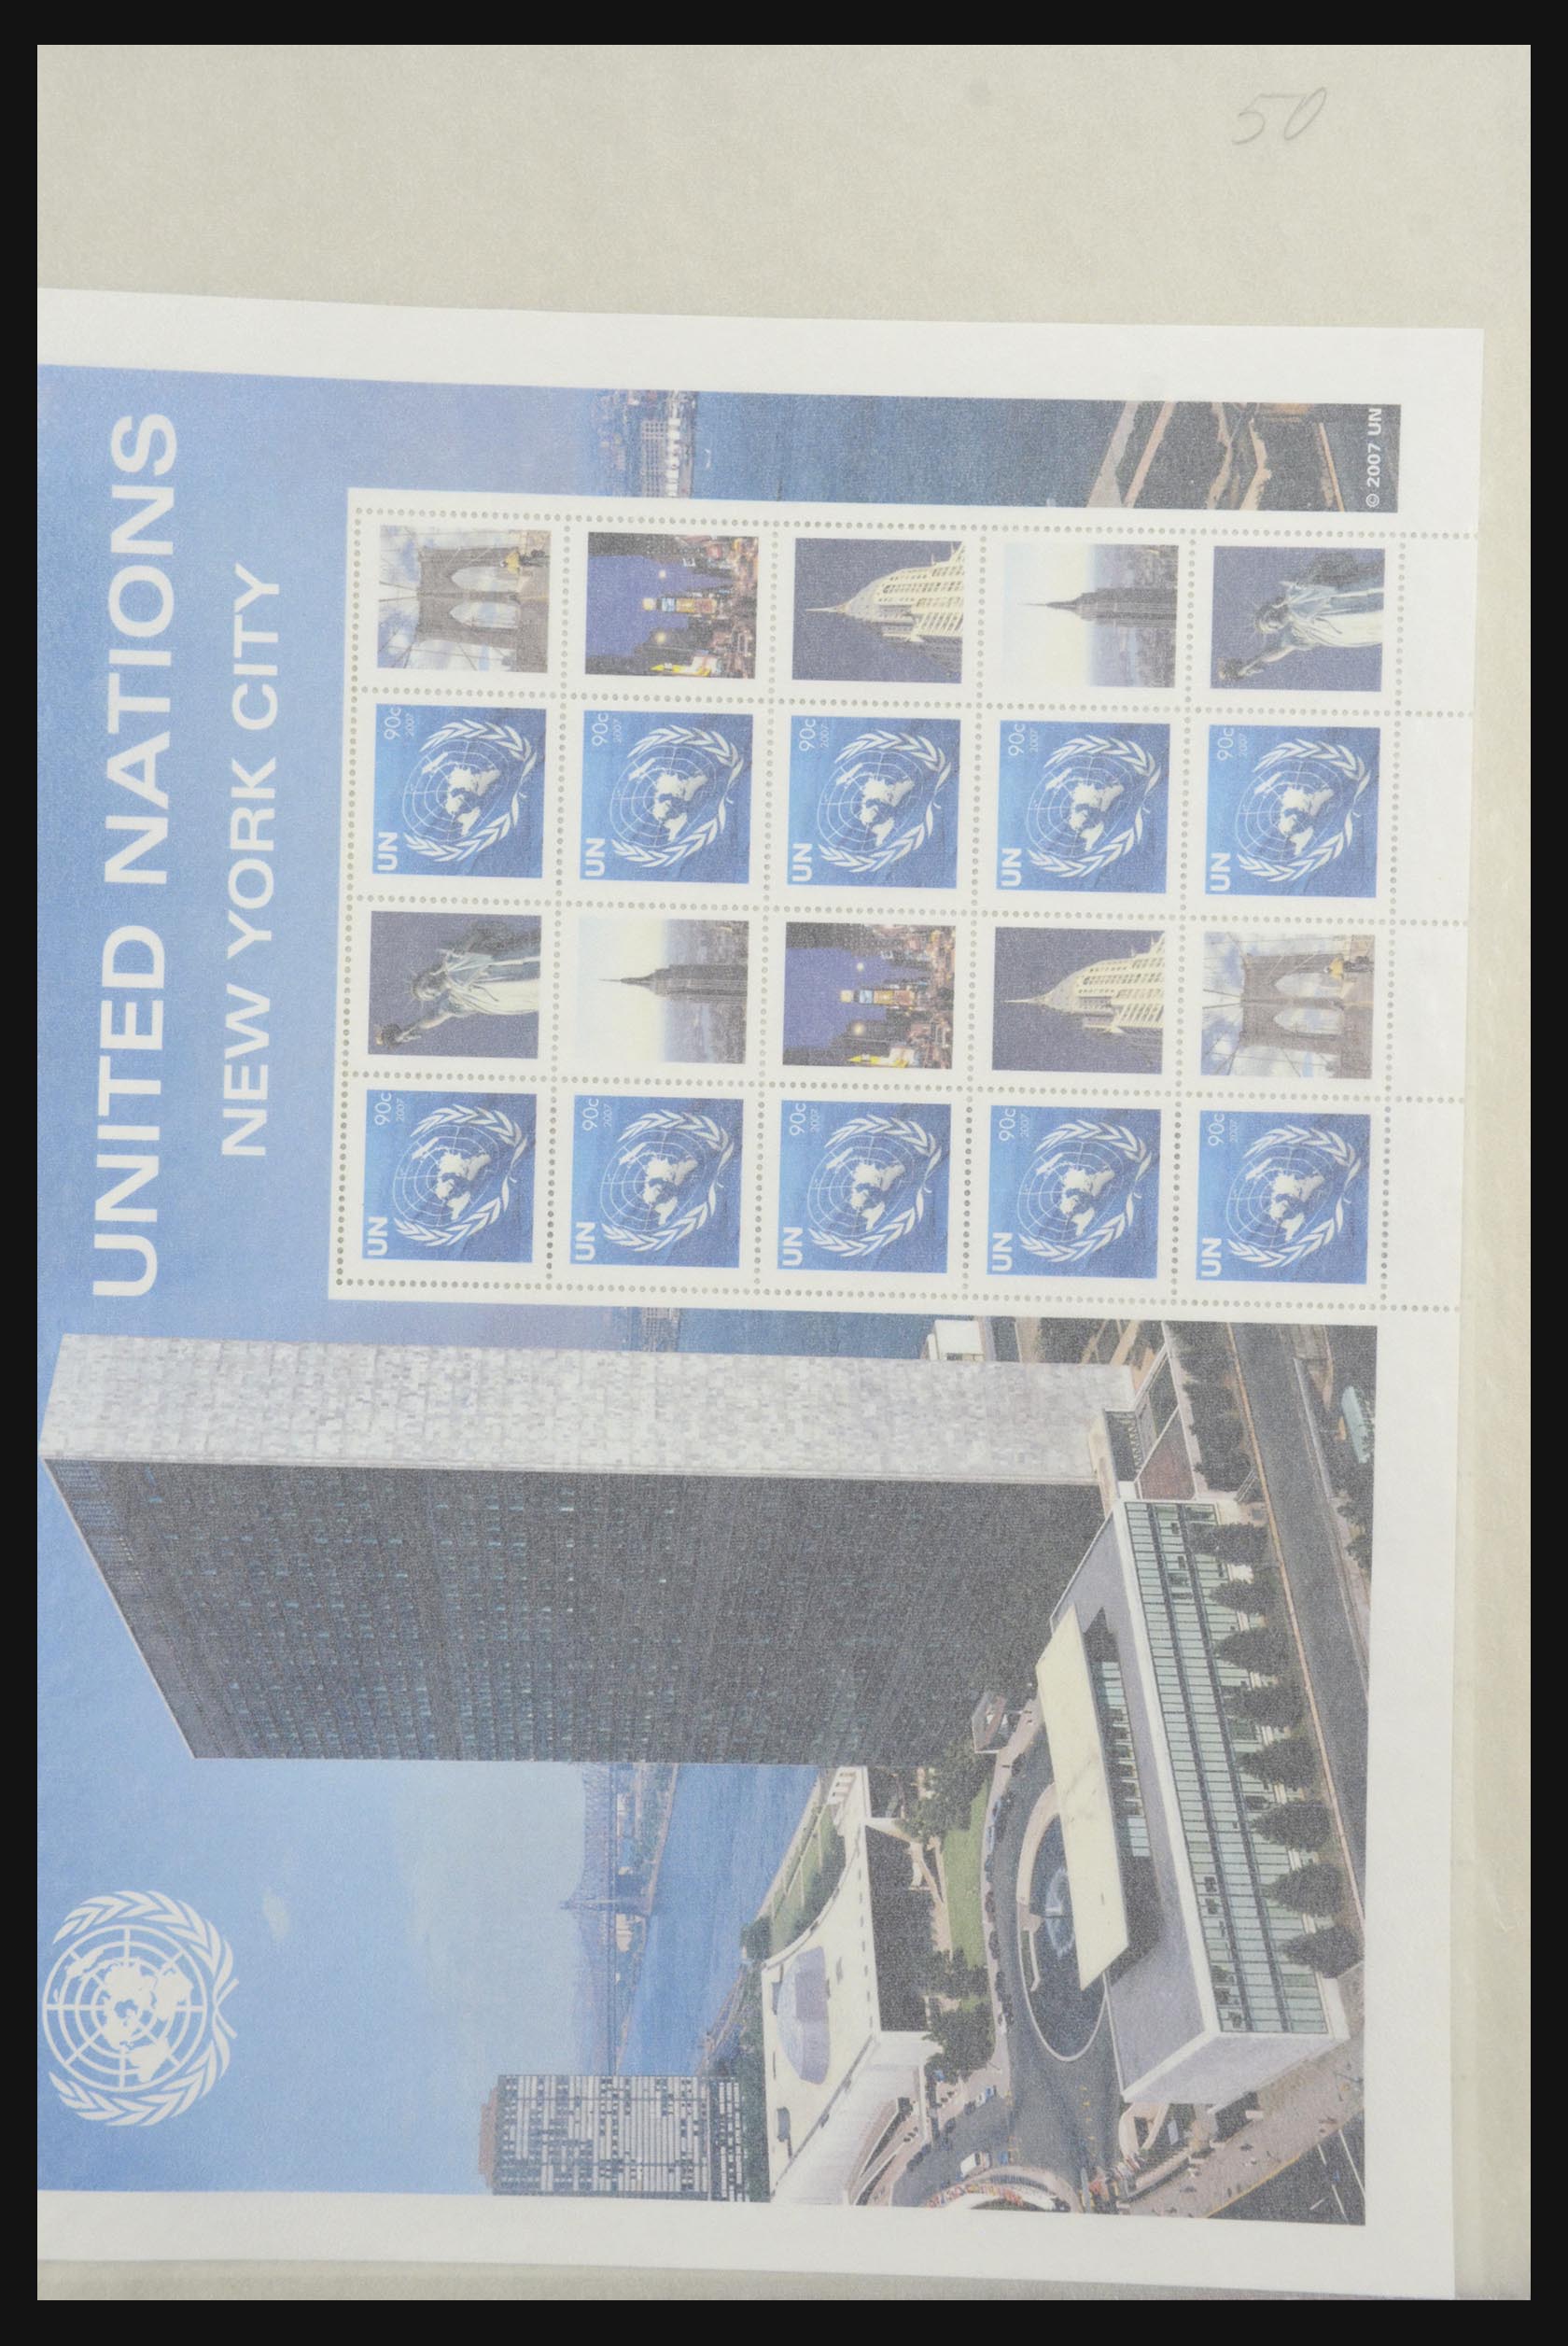 31674 006 - 31674 United Nations personalised sheetlets 2003-2012.